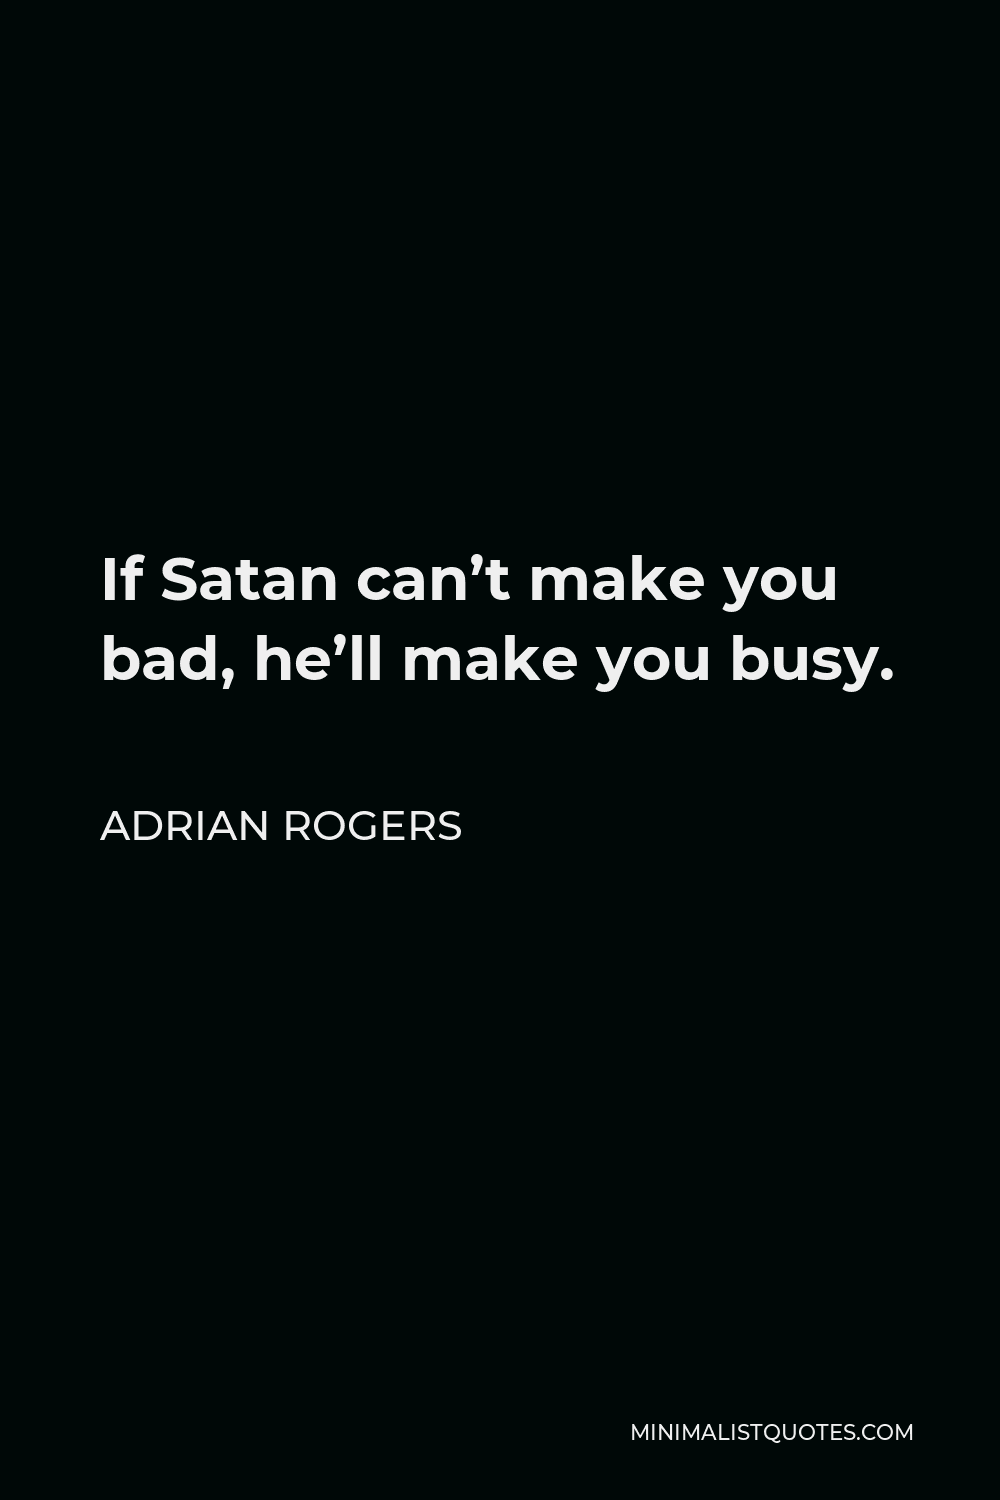 Adrian Rogers Quote - If Satan can’t make you bad, he’ll make you busy.